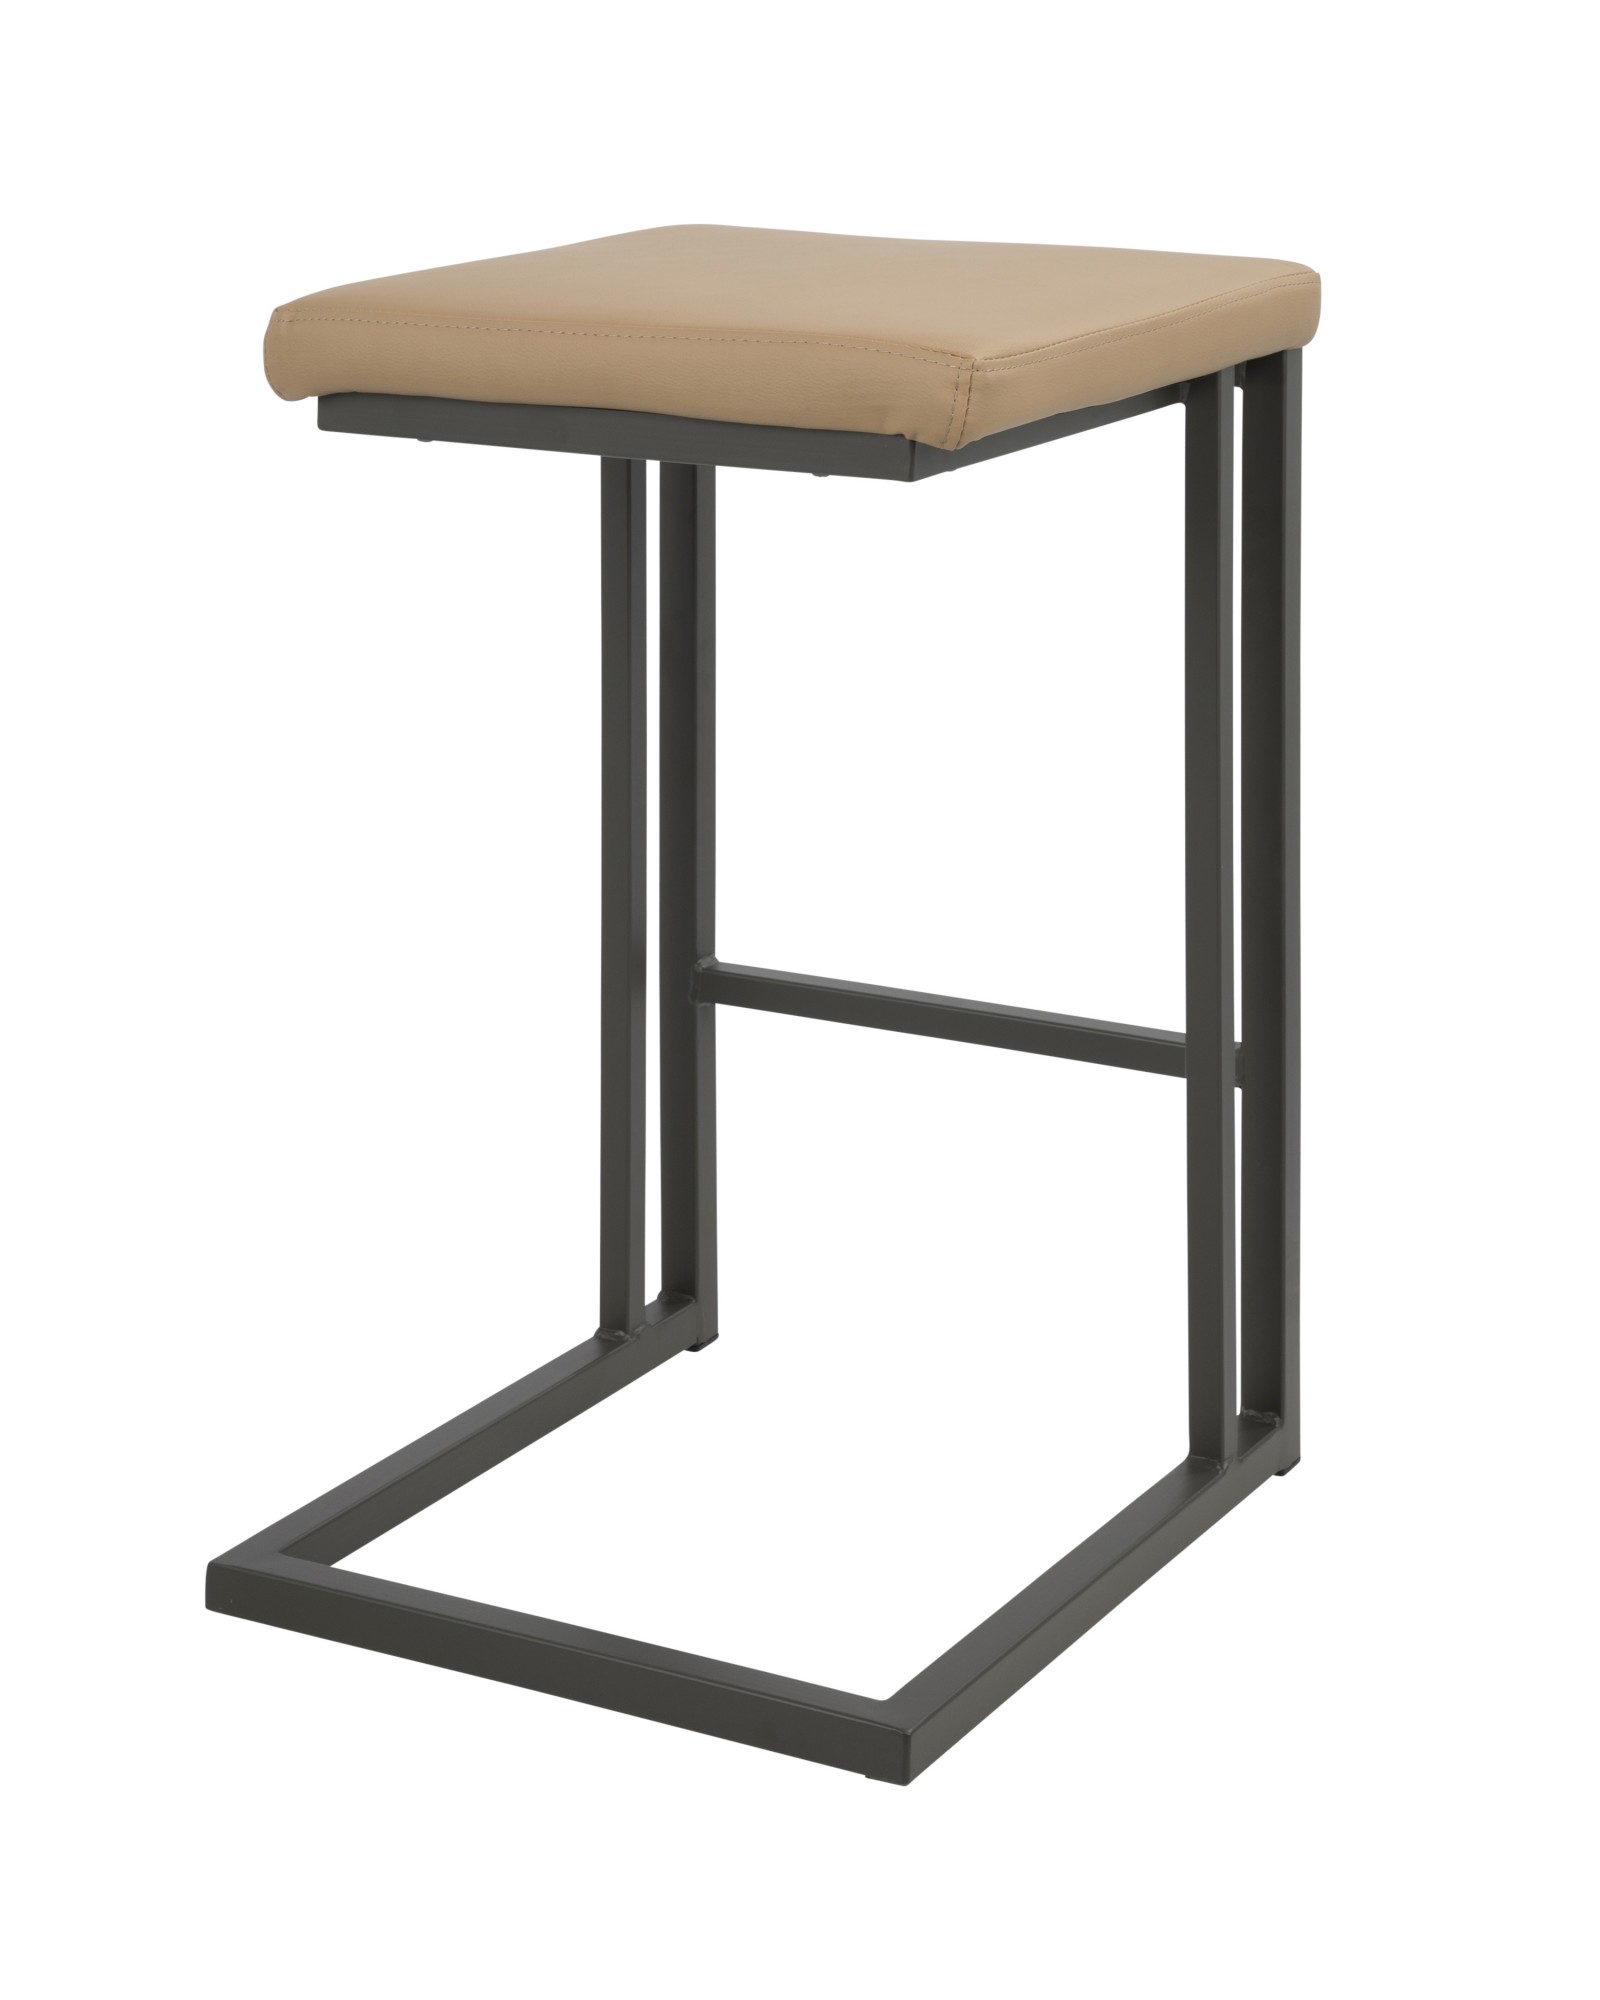 Roman Industrial Counter Stool in Grey and Camel Faux Leather - Set of 2